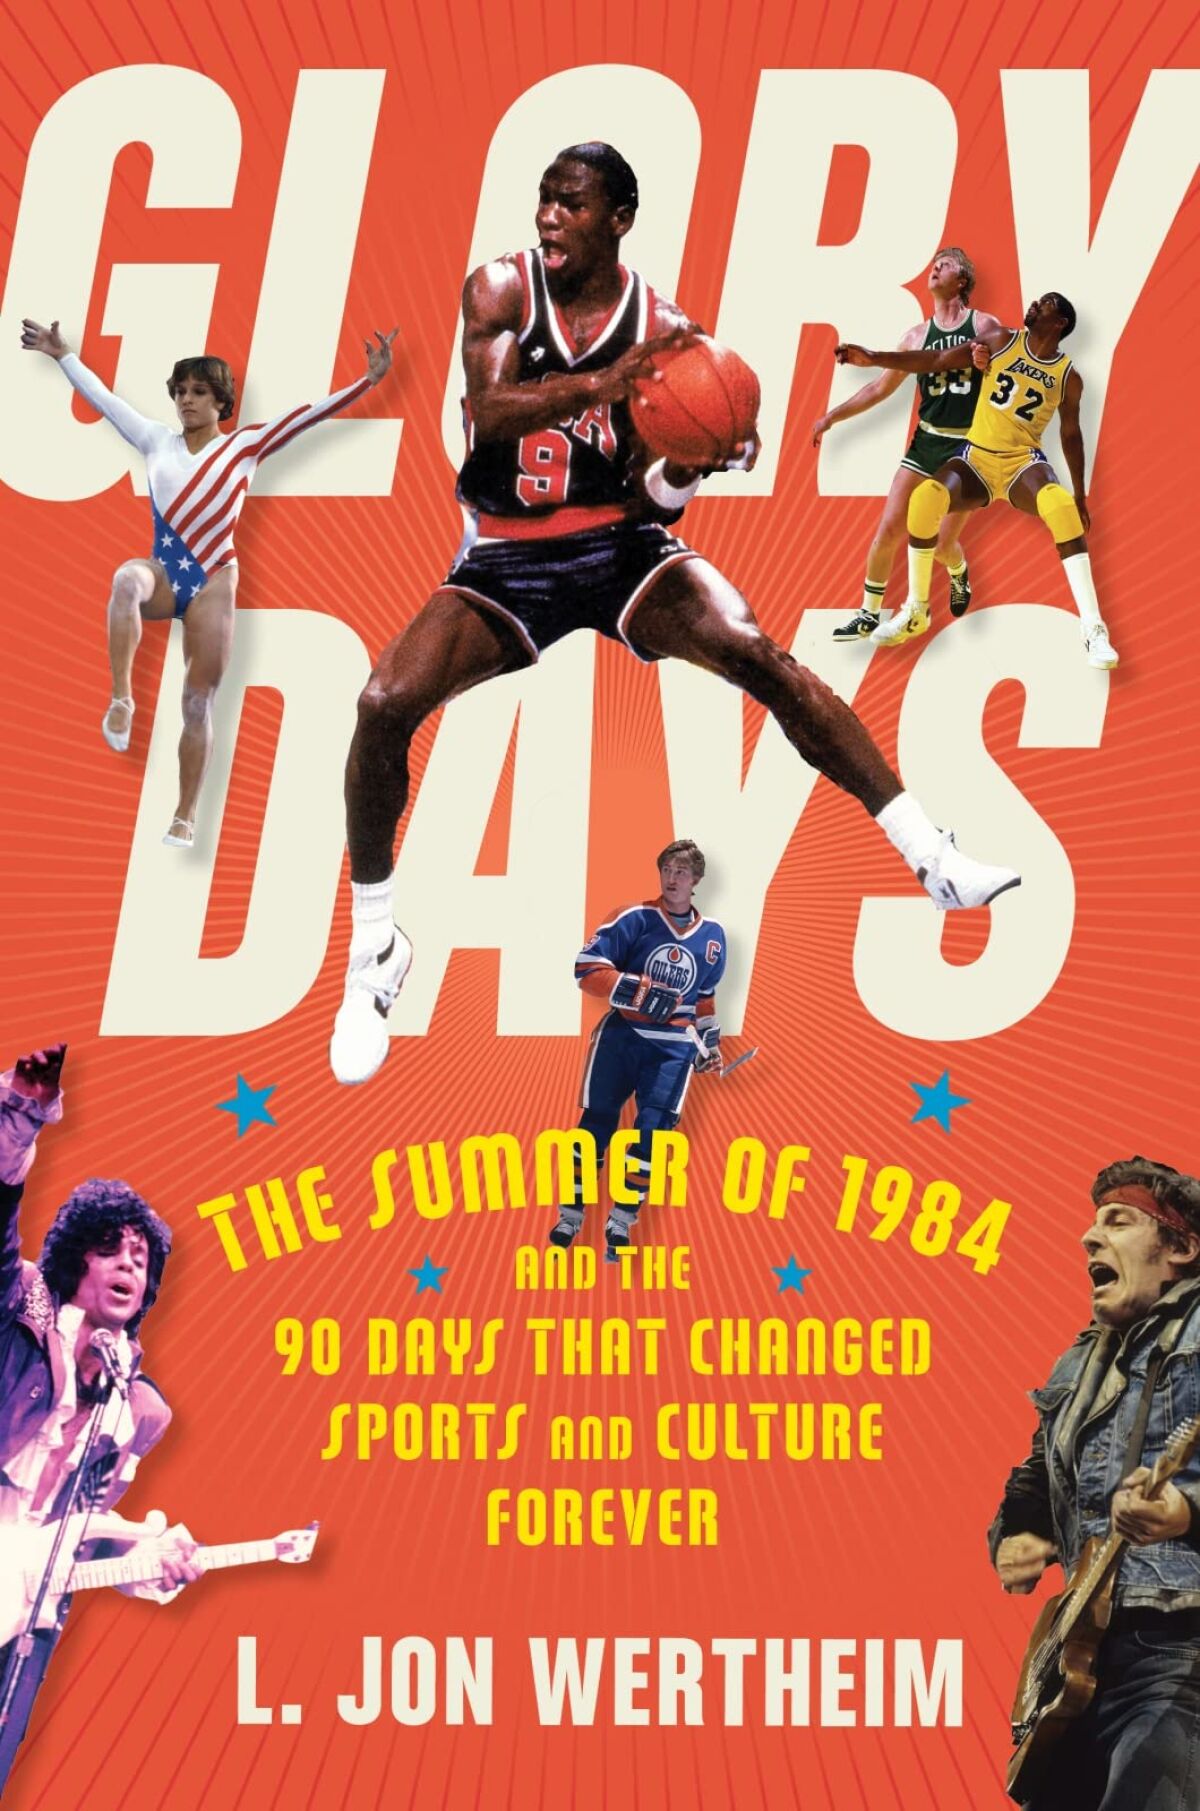 "Glory Days: The Summer of 1984 and the 90 Days That Changed Sports and Culture Forever" by L. Jon Wertheim